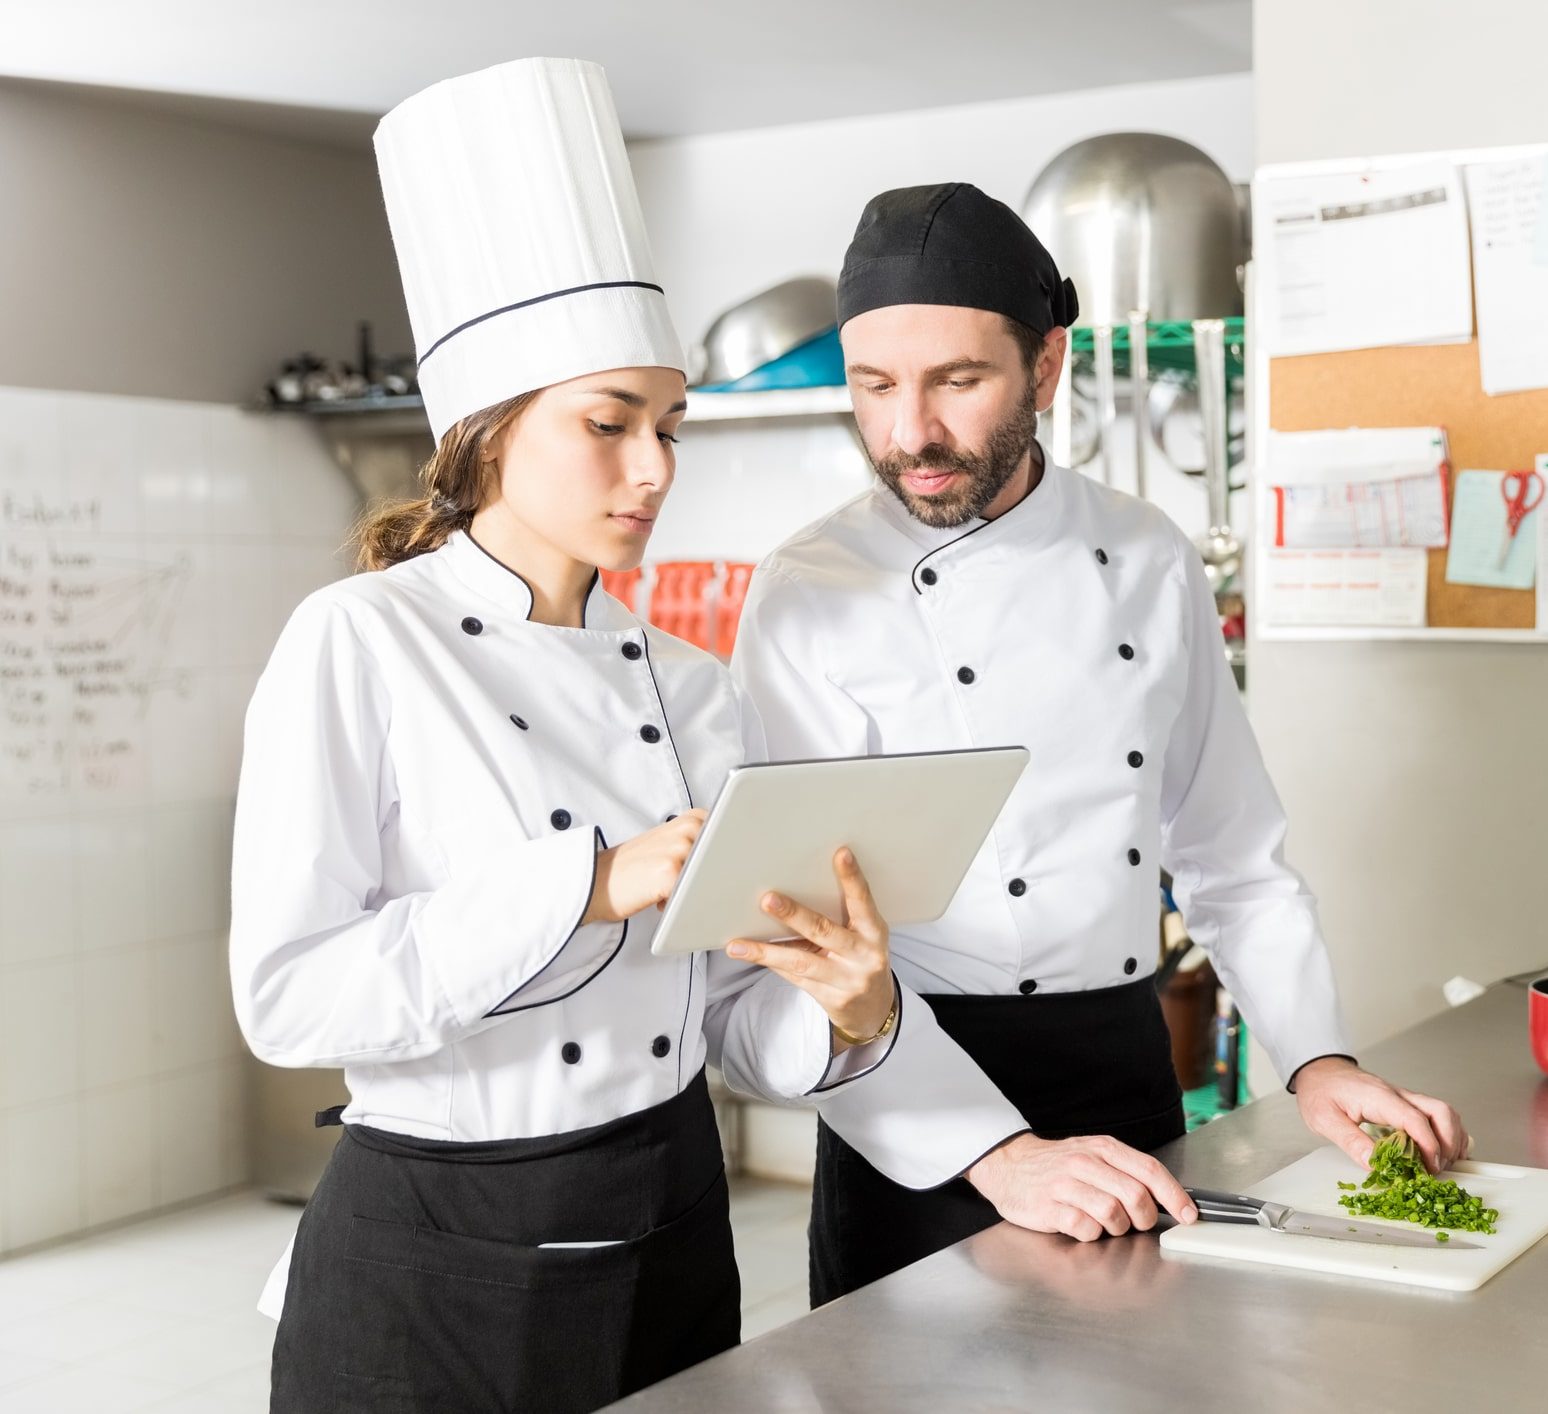 Team of two chefs working at a restaurant and looking at the menu